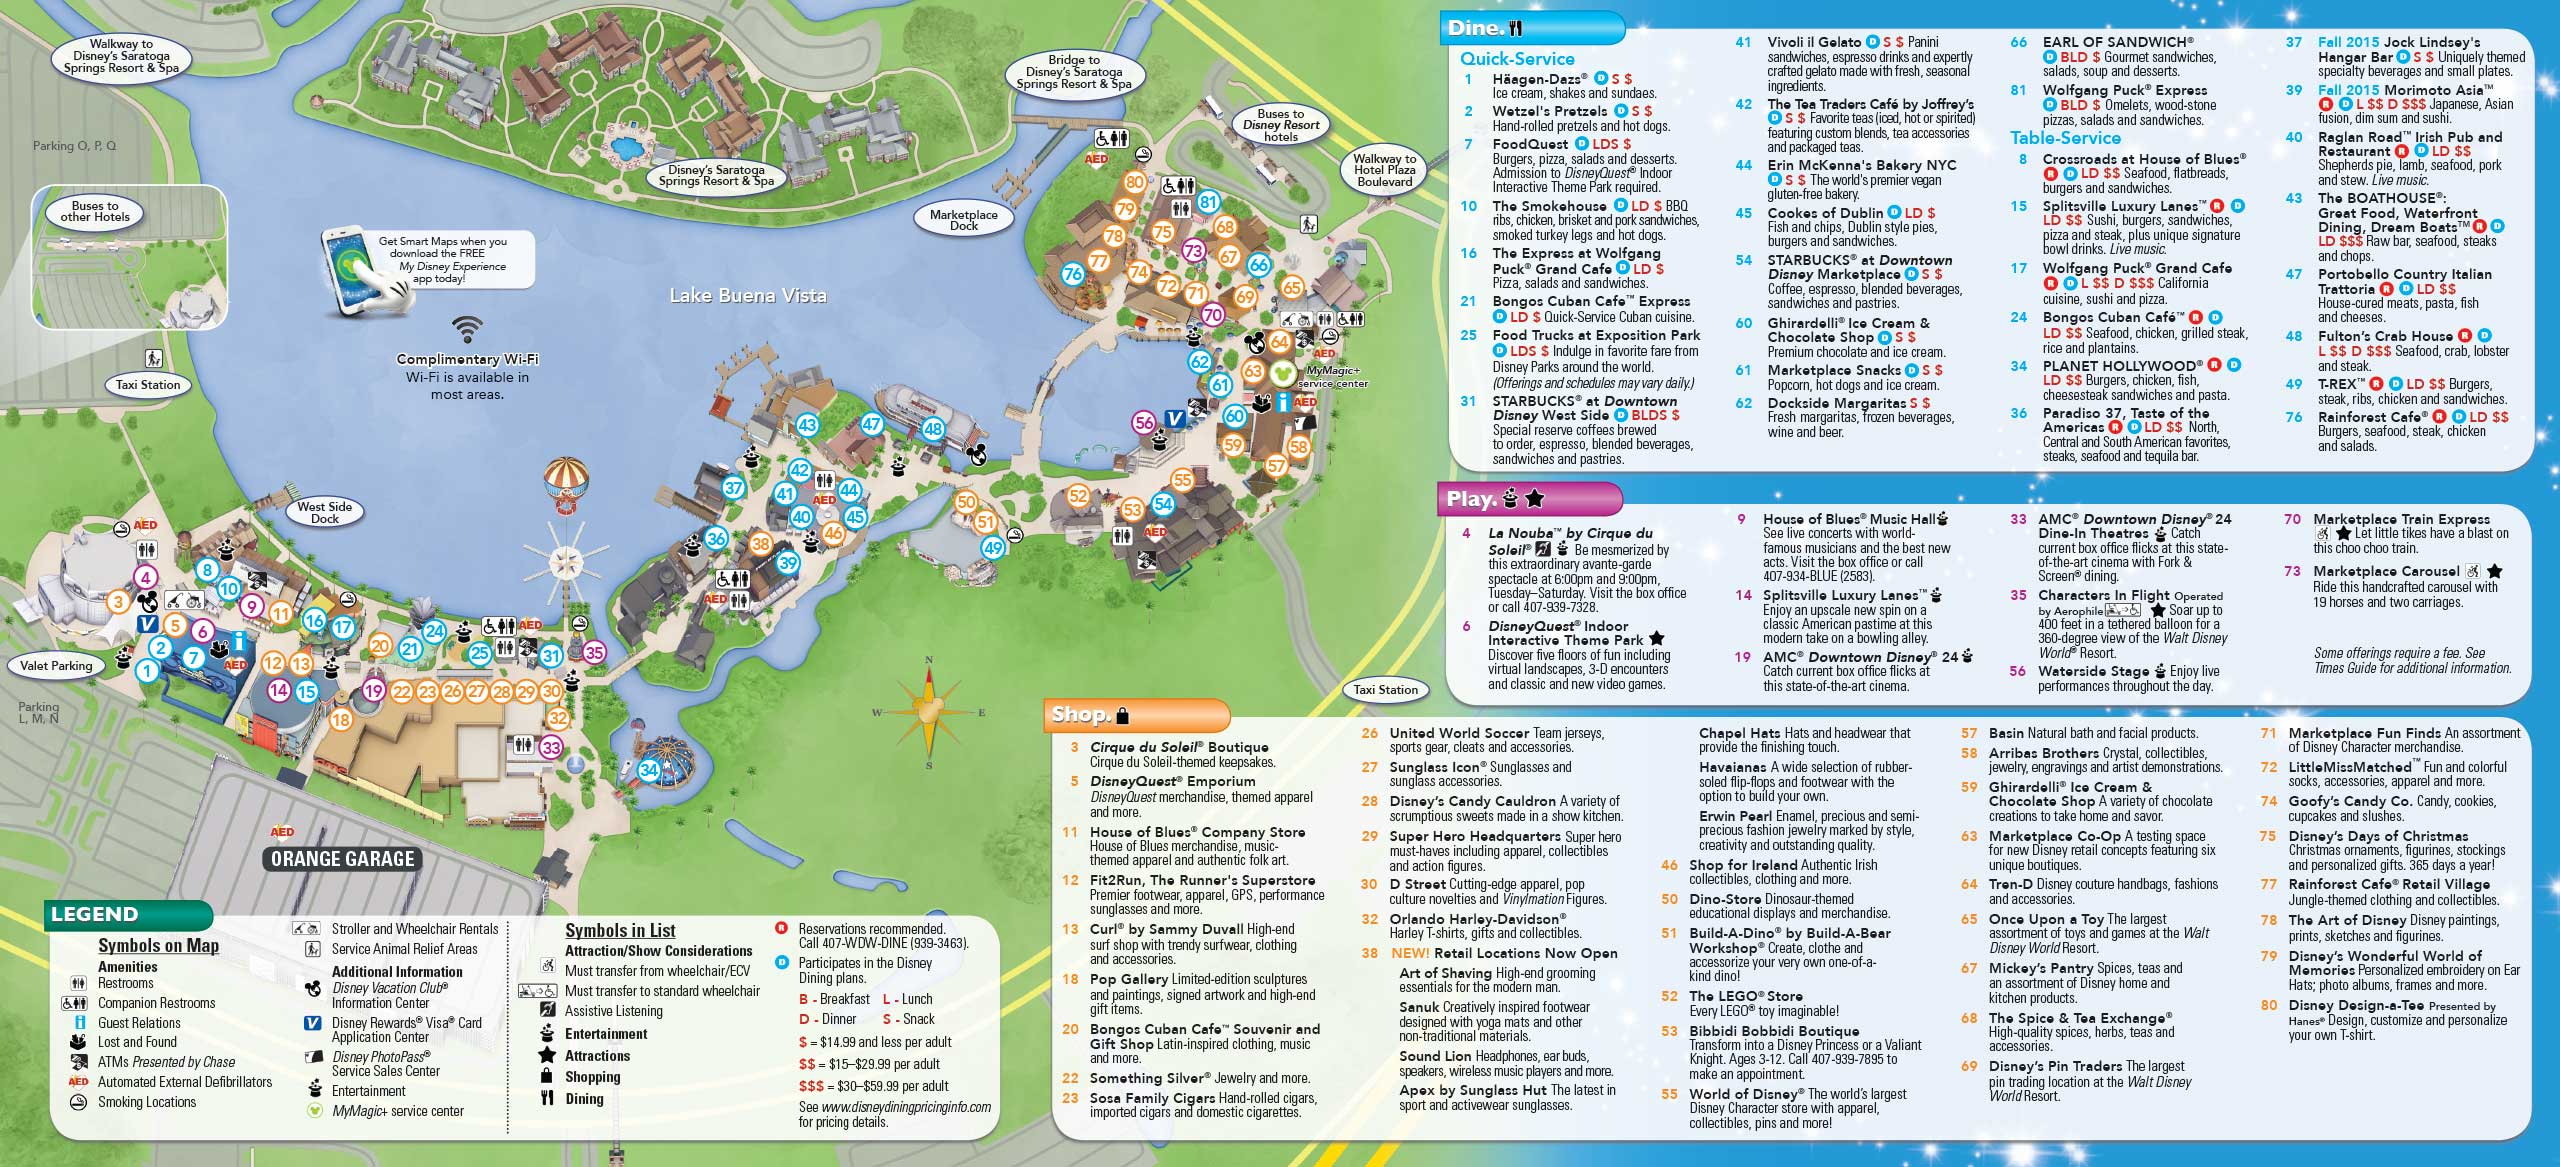 PHOTOS New Downtown Disney Guide Map Includes Disney 